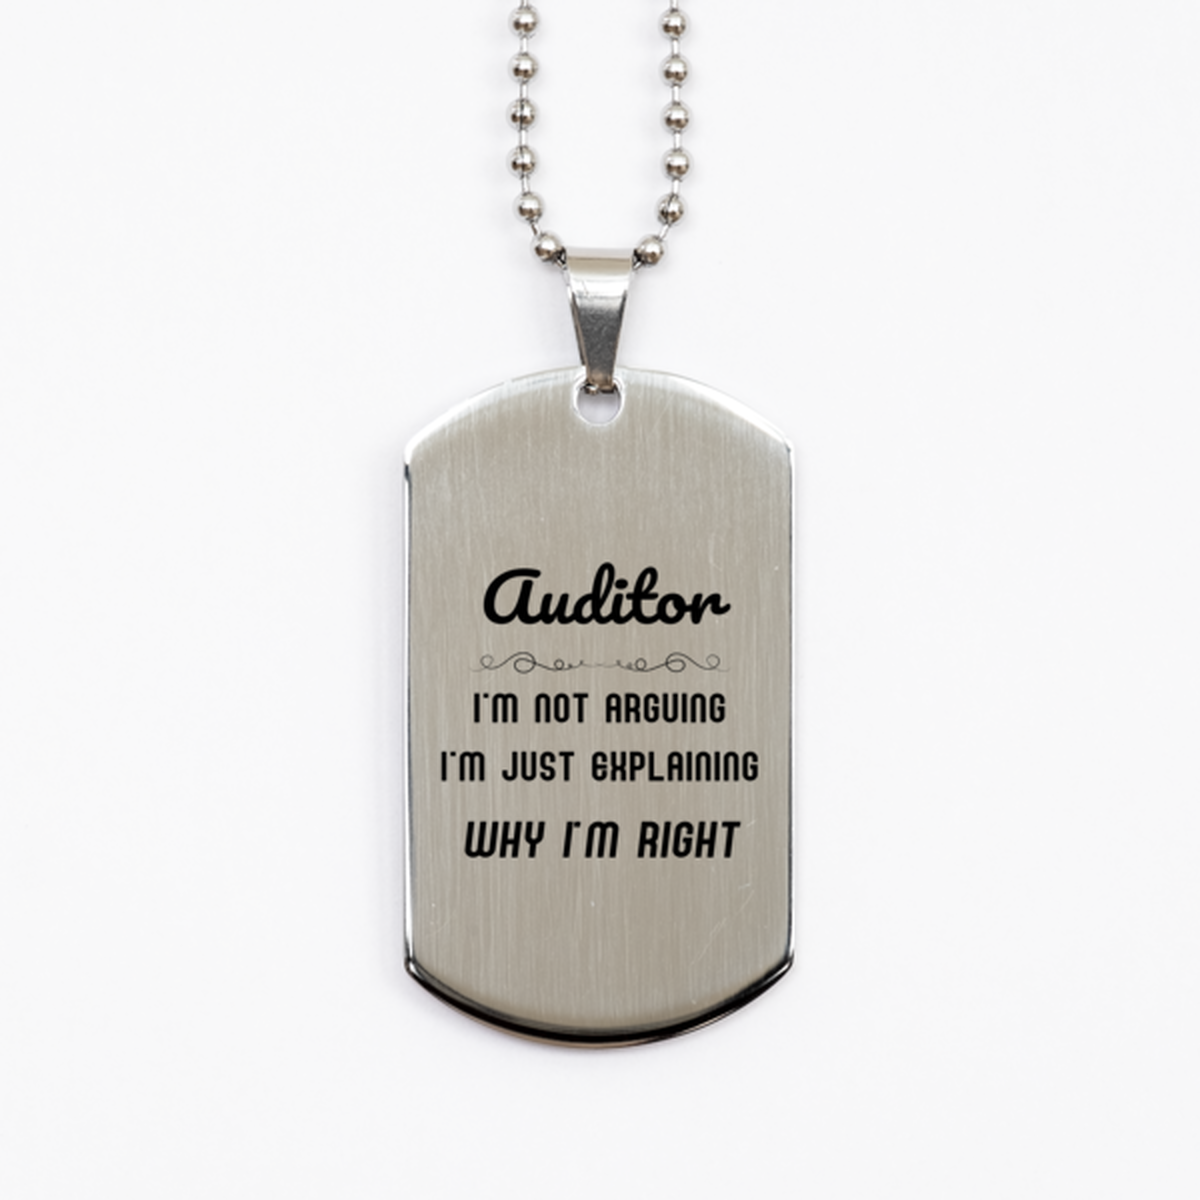 Auditor I'm not Arguing. I'm Just Explaining Why I'm RIGHT Silver Dog Tag, Funny Saying Quote Auditor Gifts For Auditor Graduation Birthday Christmas Gifts for Men Women Coworker